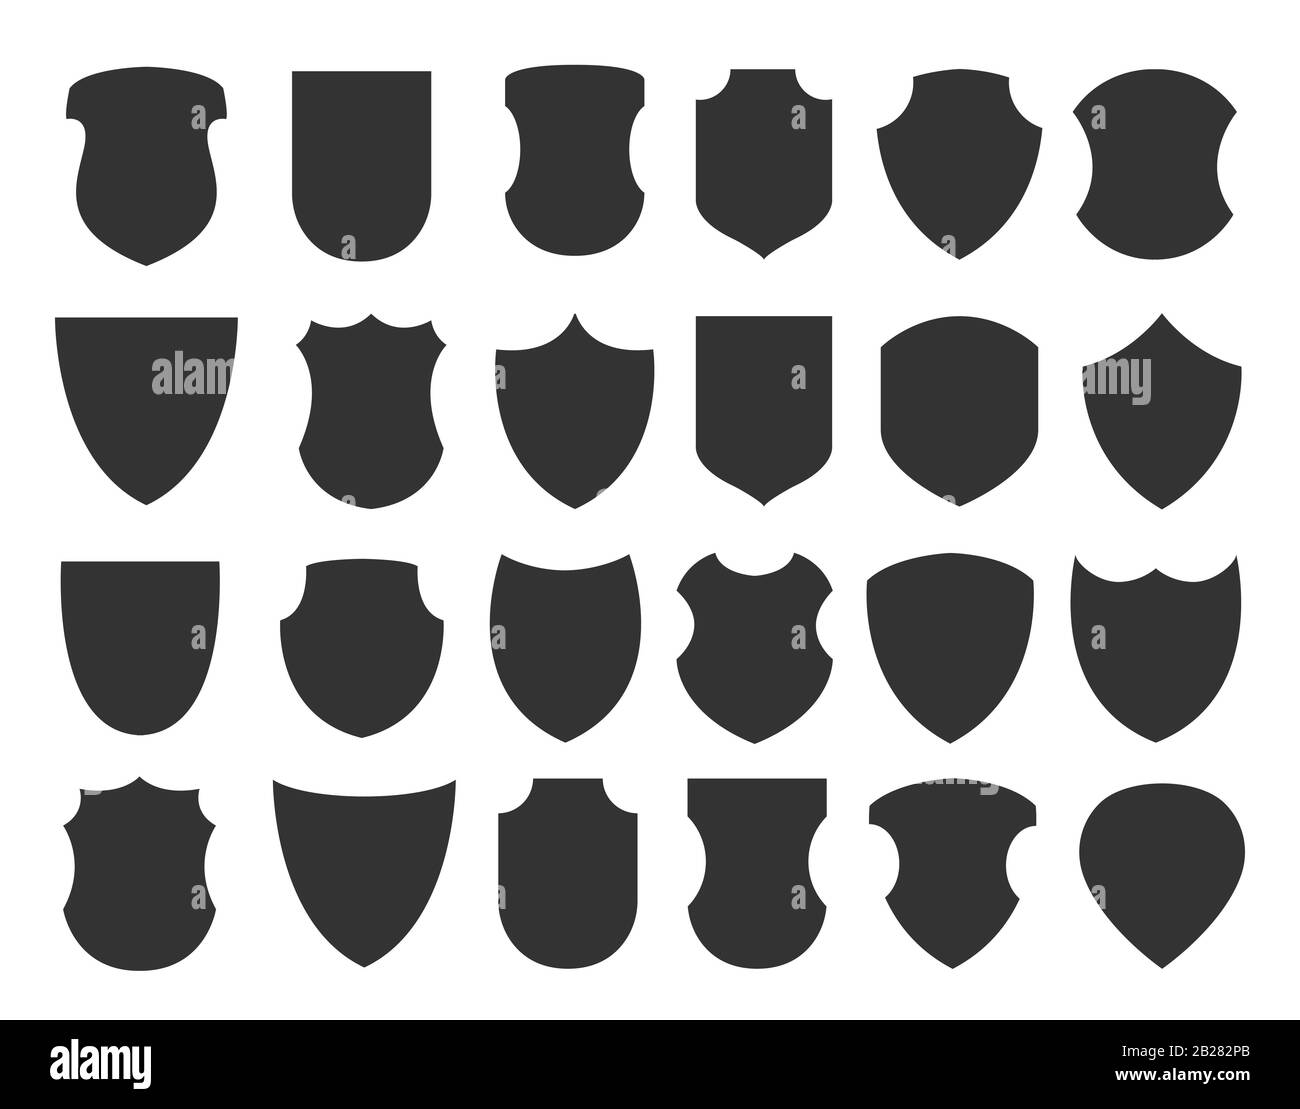 Blank shield badge Black and White Stock Photos & Images - Alamy